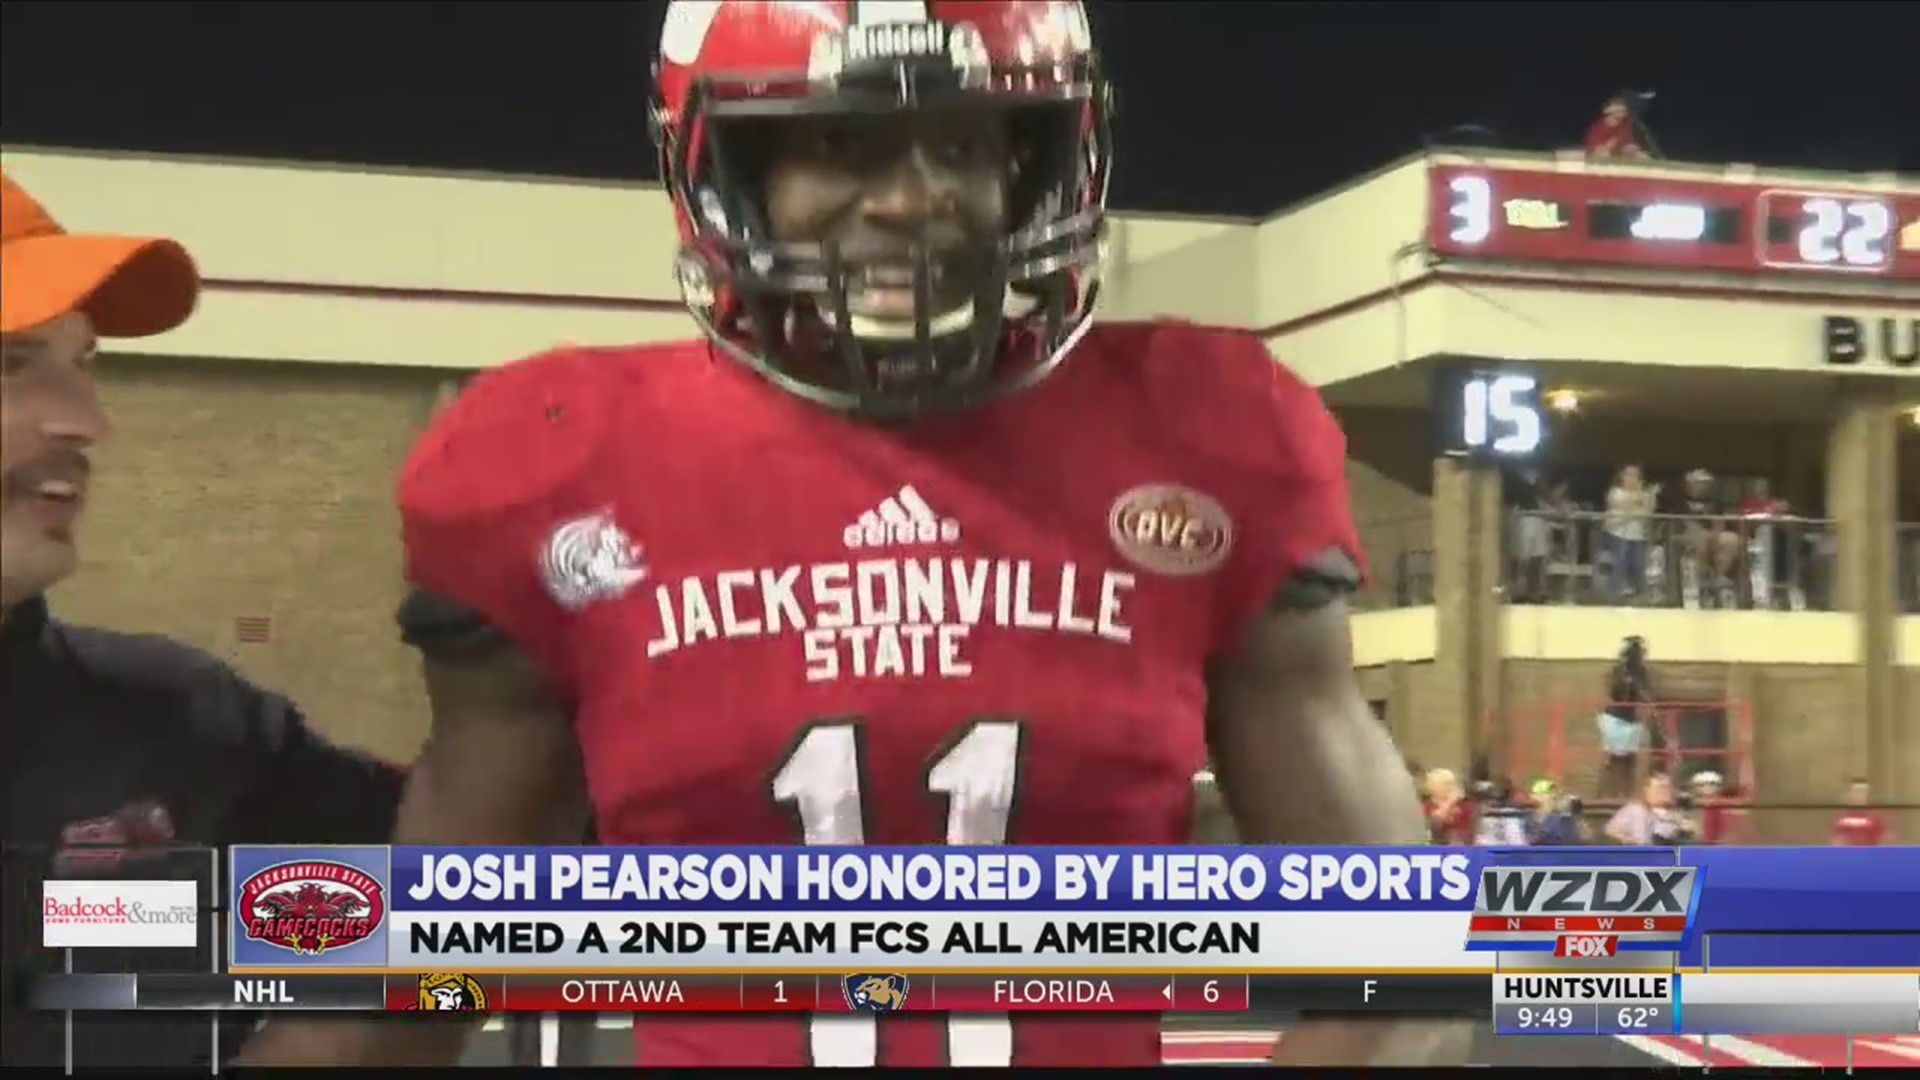 Decatur native Josh Pearson earned All-America honors for the second year in as many seasons on the field in Jacksonville. A senior from Decatur, Ala., also earned his second-straight All-OVC nod in 2019 after a first-team mention a year ago. He wraps up a record-breaking two seasons on the field for JSU with a school-record 30 touchdown catches that rank among the top 10 in OVC history.